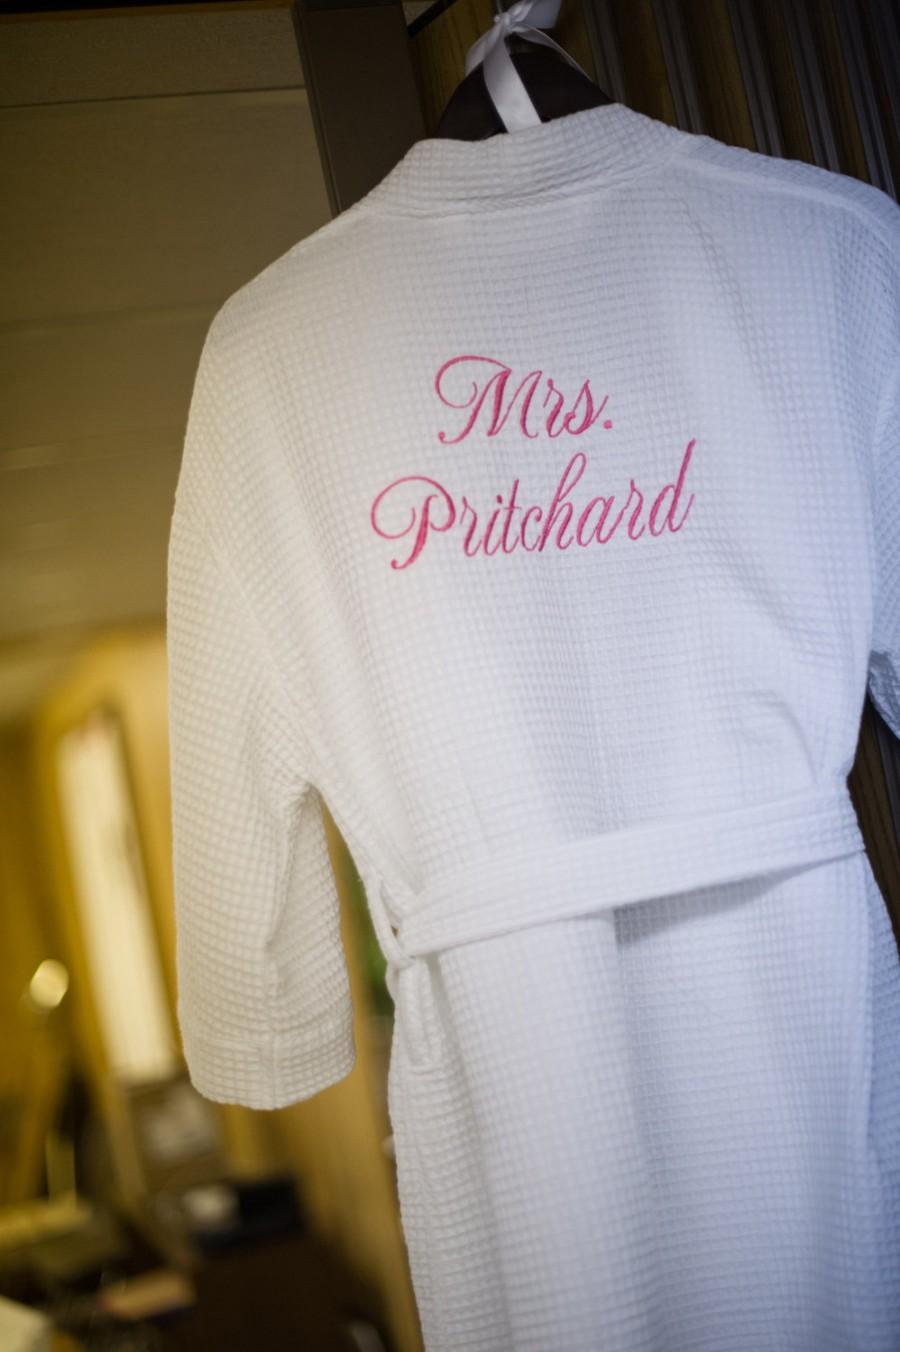 Wedding - Ladies Personalized Bath Robe Waffle Weave Bathrobe Monogrammed Spa Robe Front and Back embroidery